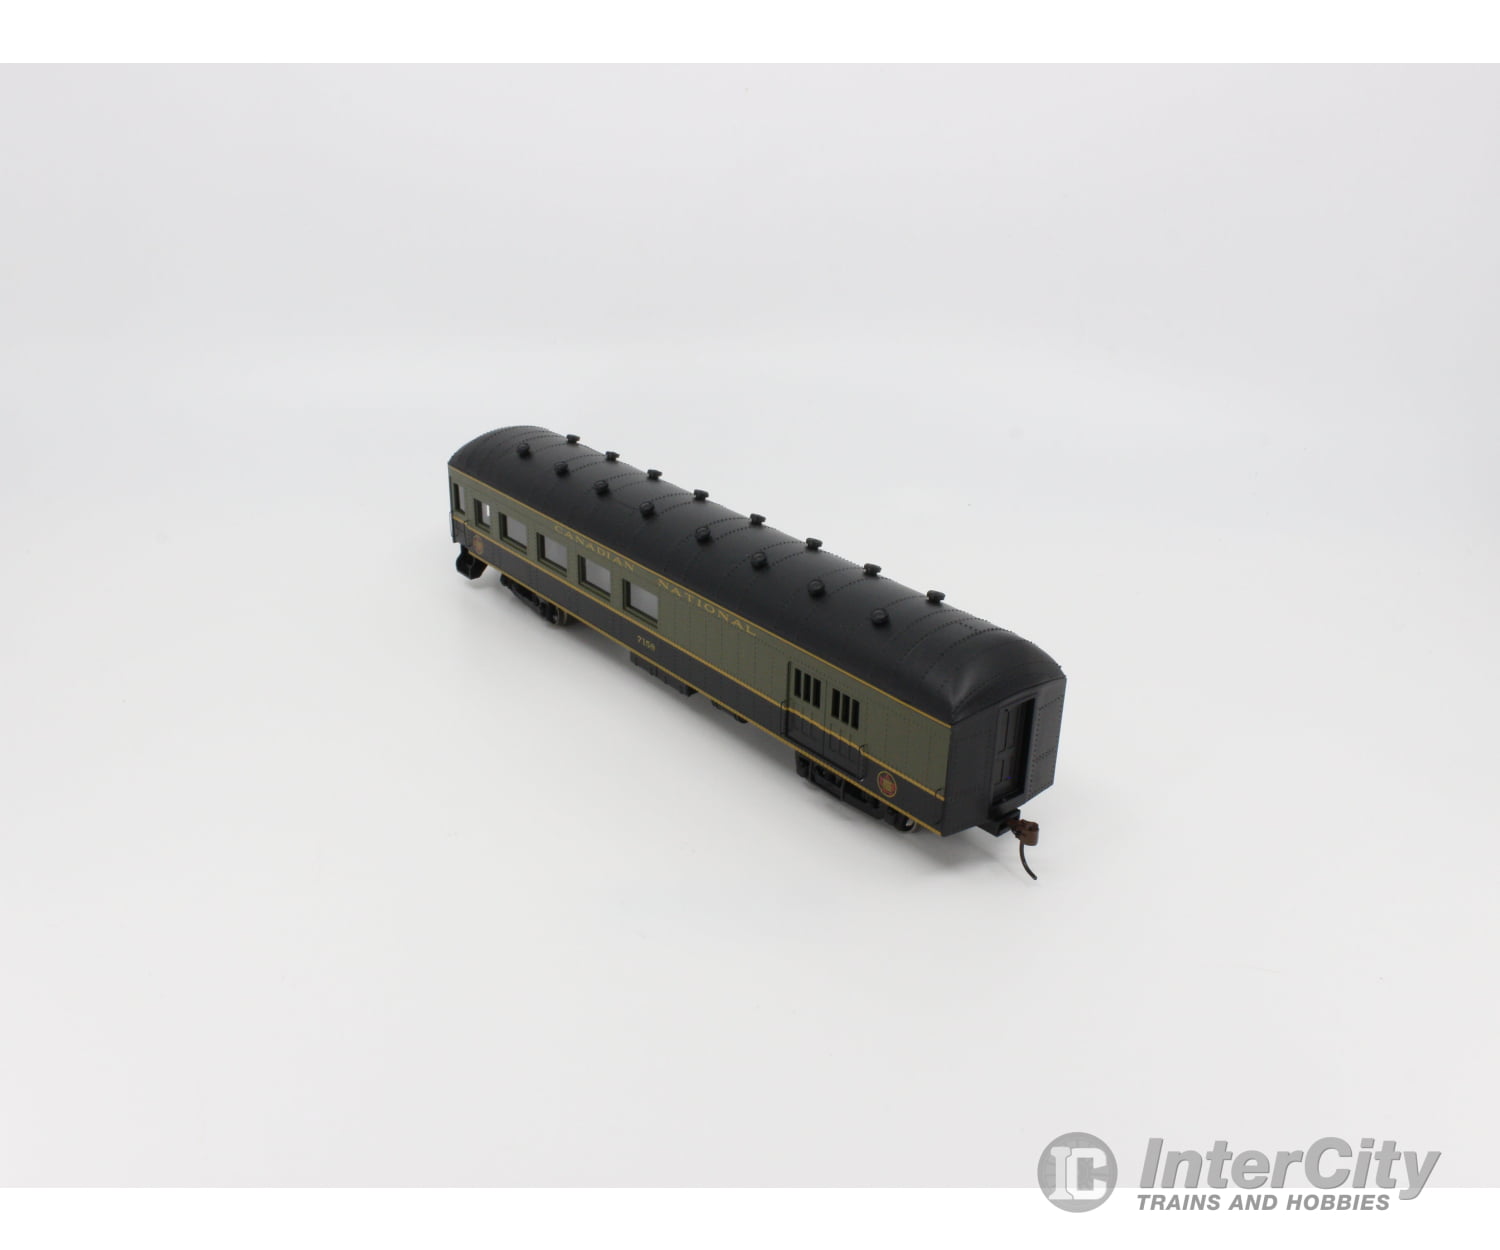 Roundhouse 86545 Ho Arch-Roof Combine Passenger Car Canadian National (Cn) 7158 Cars